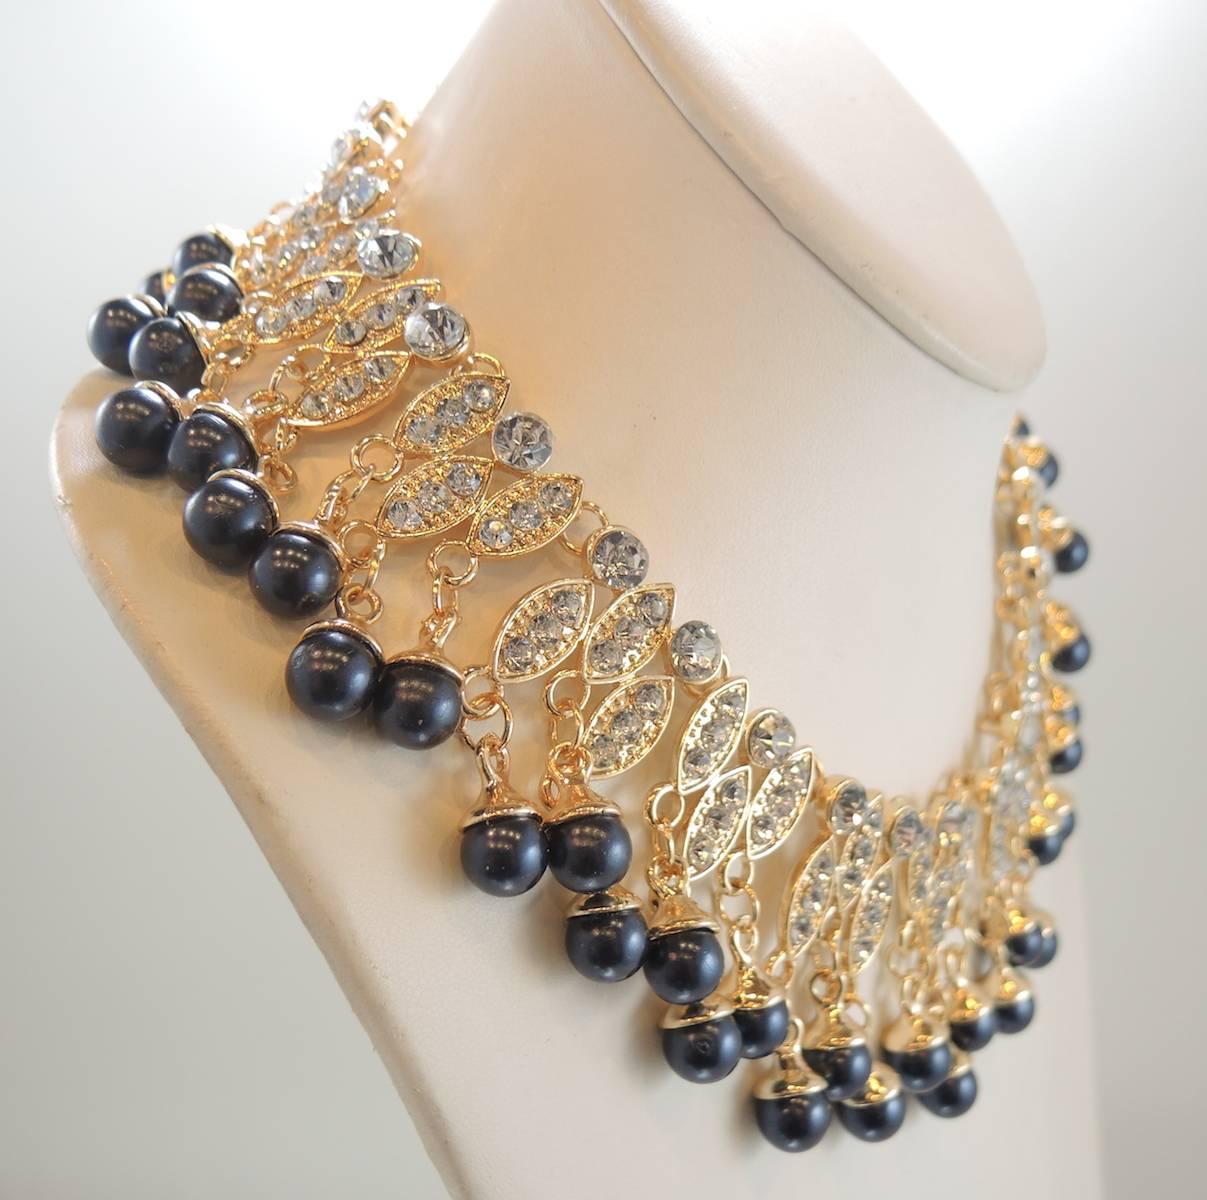 This beautiful collar necklace has sparkling marquis shaped gold tone drops with crystals embedded in its gold tone setting.  At the bottom of each drop are blue beads. It has a lobster clasp and measures 16-1/2” x 2”.  It is in excellent condition.